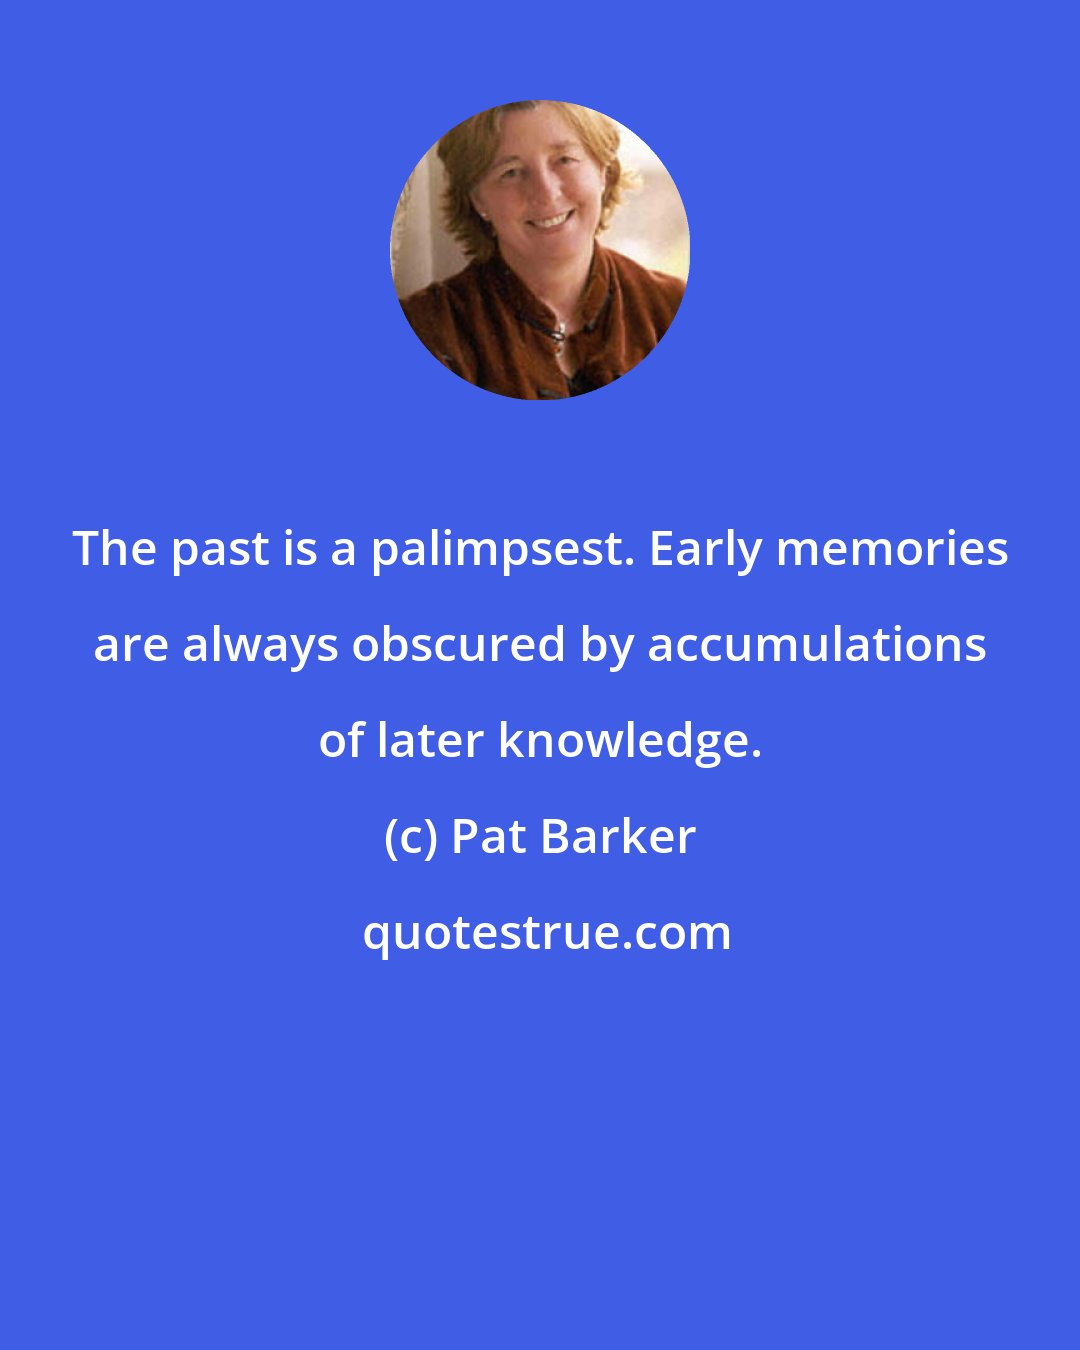 Pat Barker: The past is a palimpsest. Early memories are always obscured by accumulations of later knowledge.